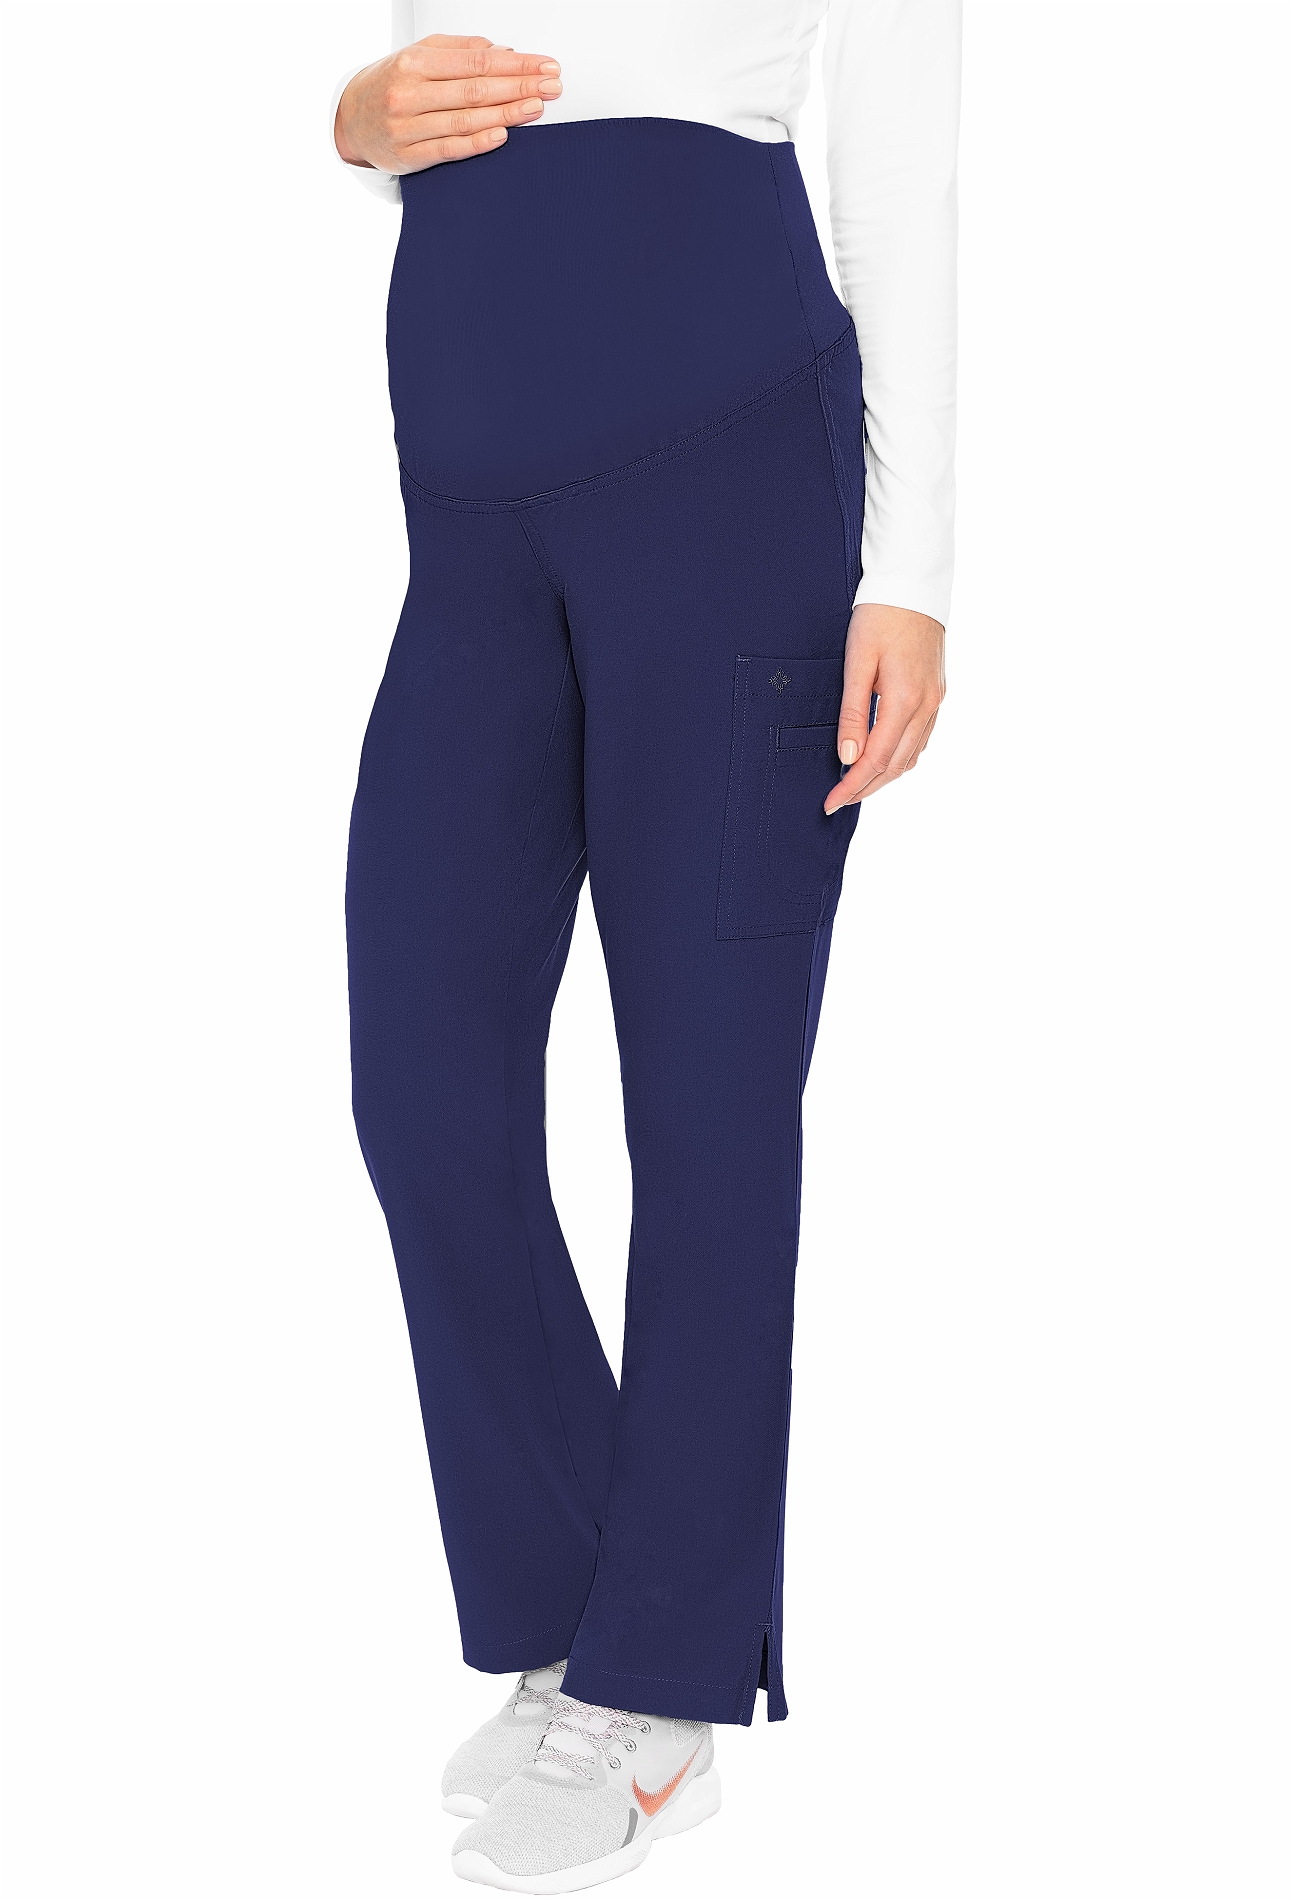 Med Couture Activate Women's Knit Waist Maternity Scrub Pants-MC8727